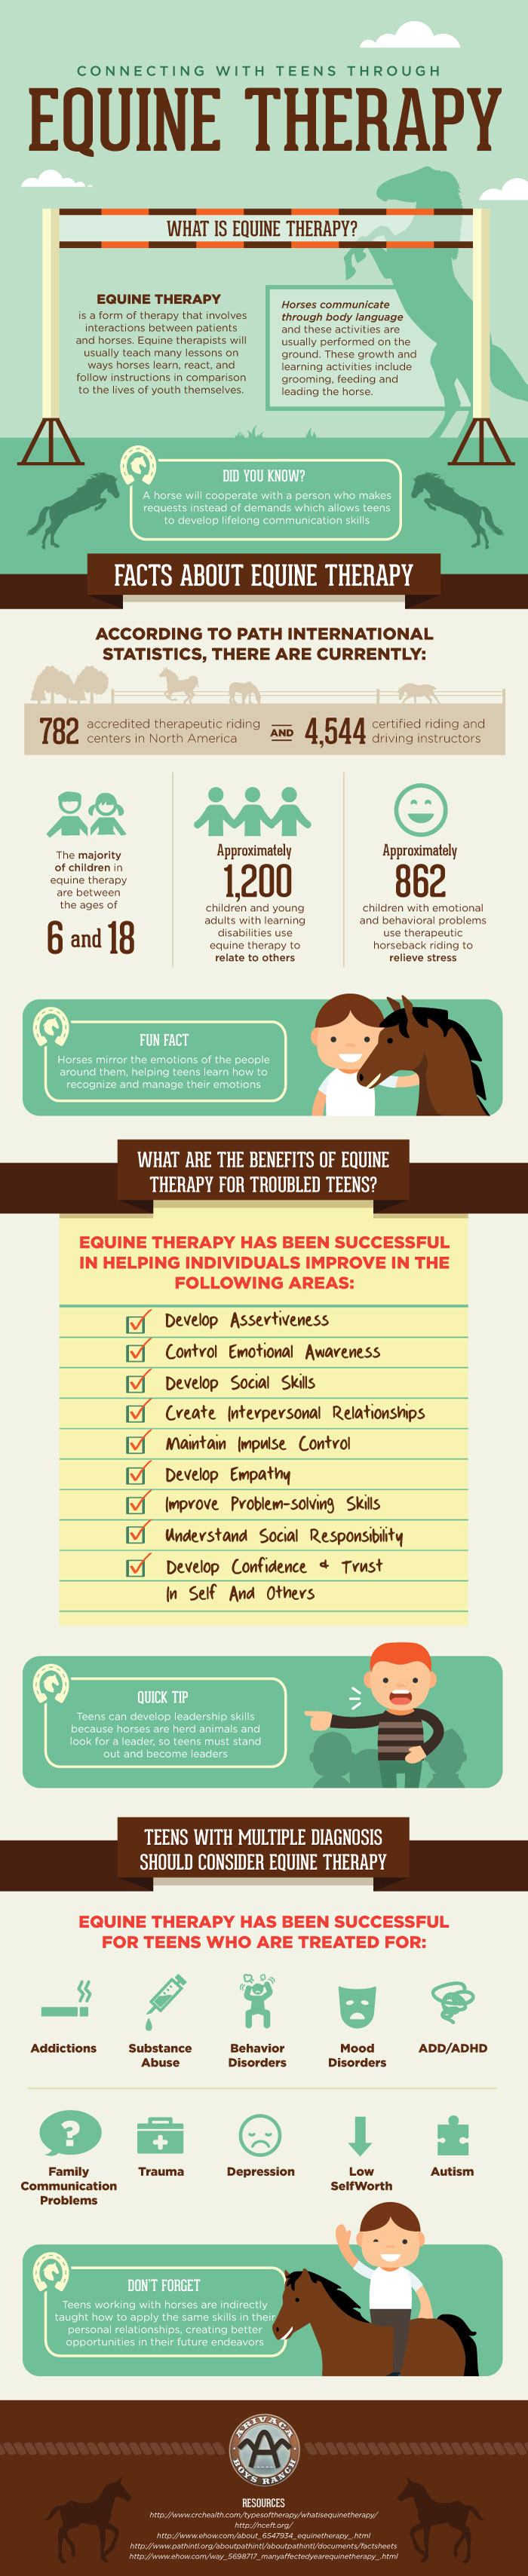 Connecting With Teens Through Equine Therapy